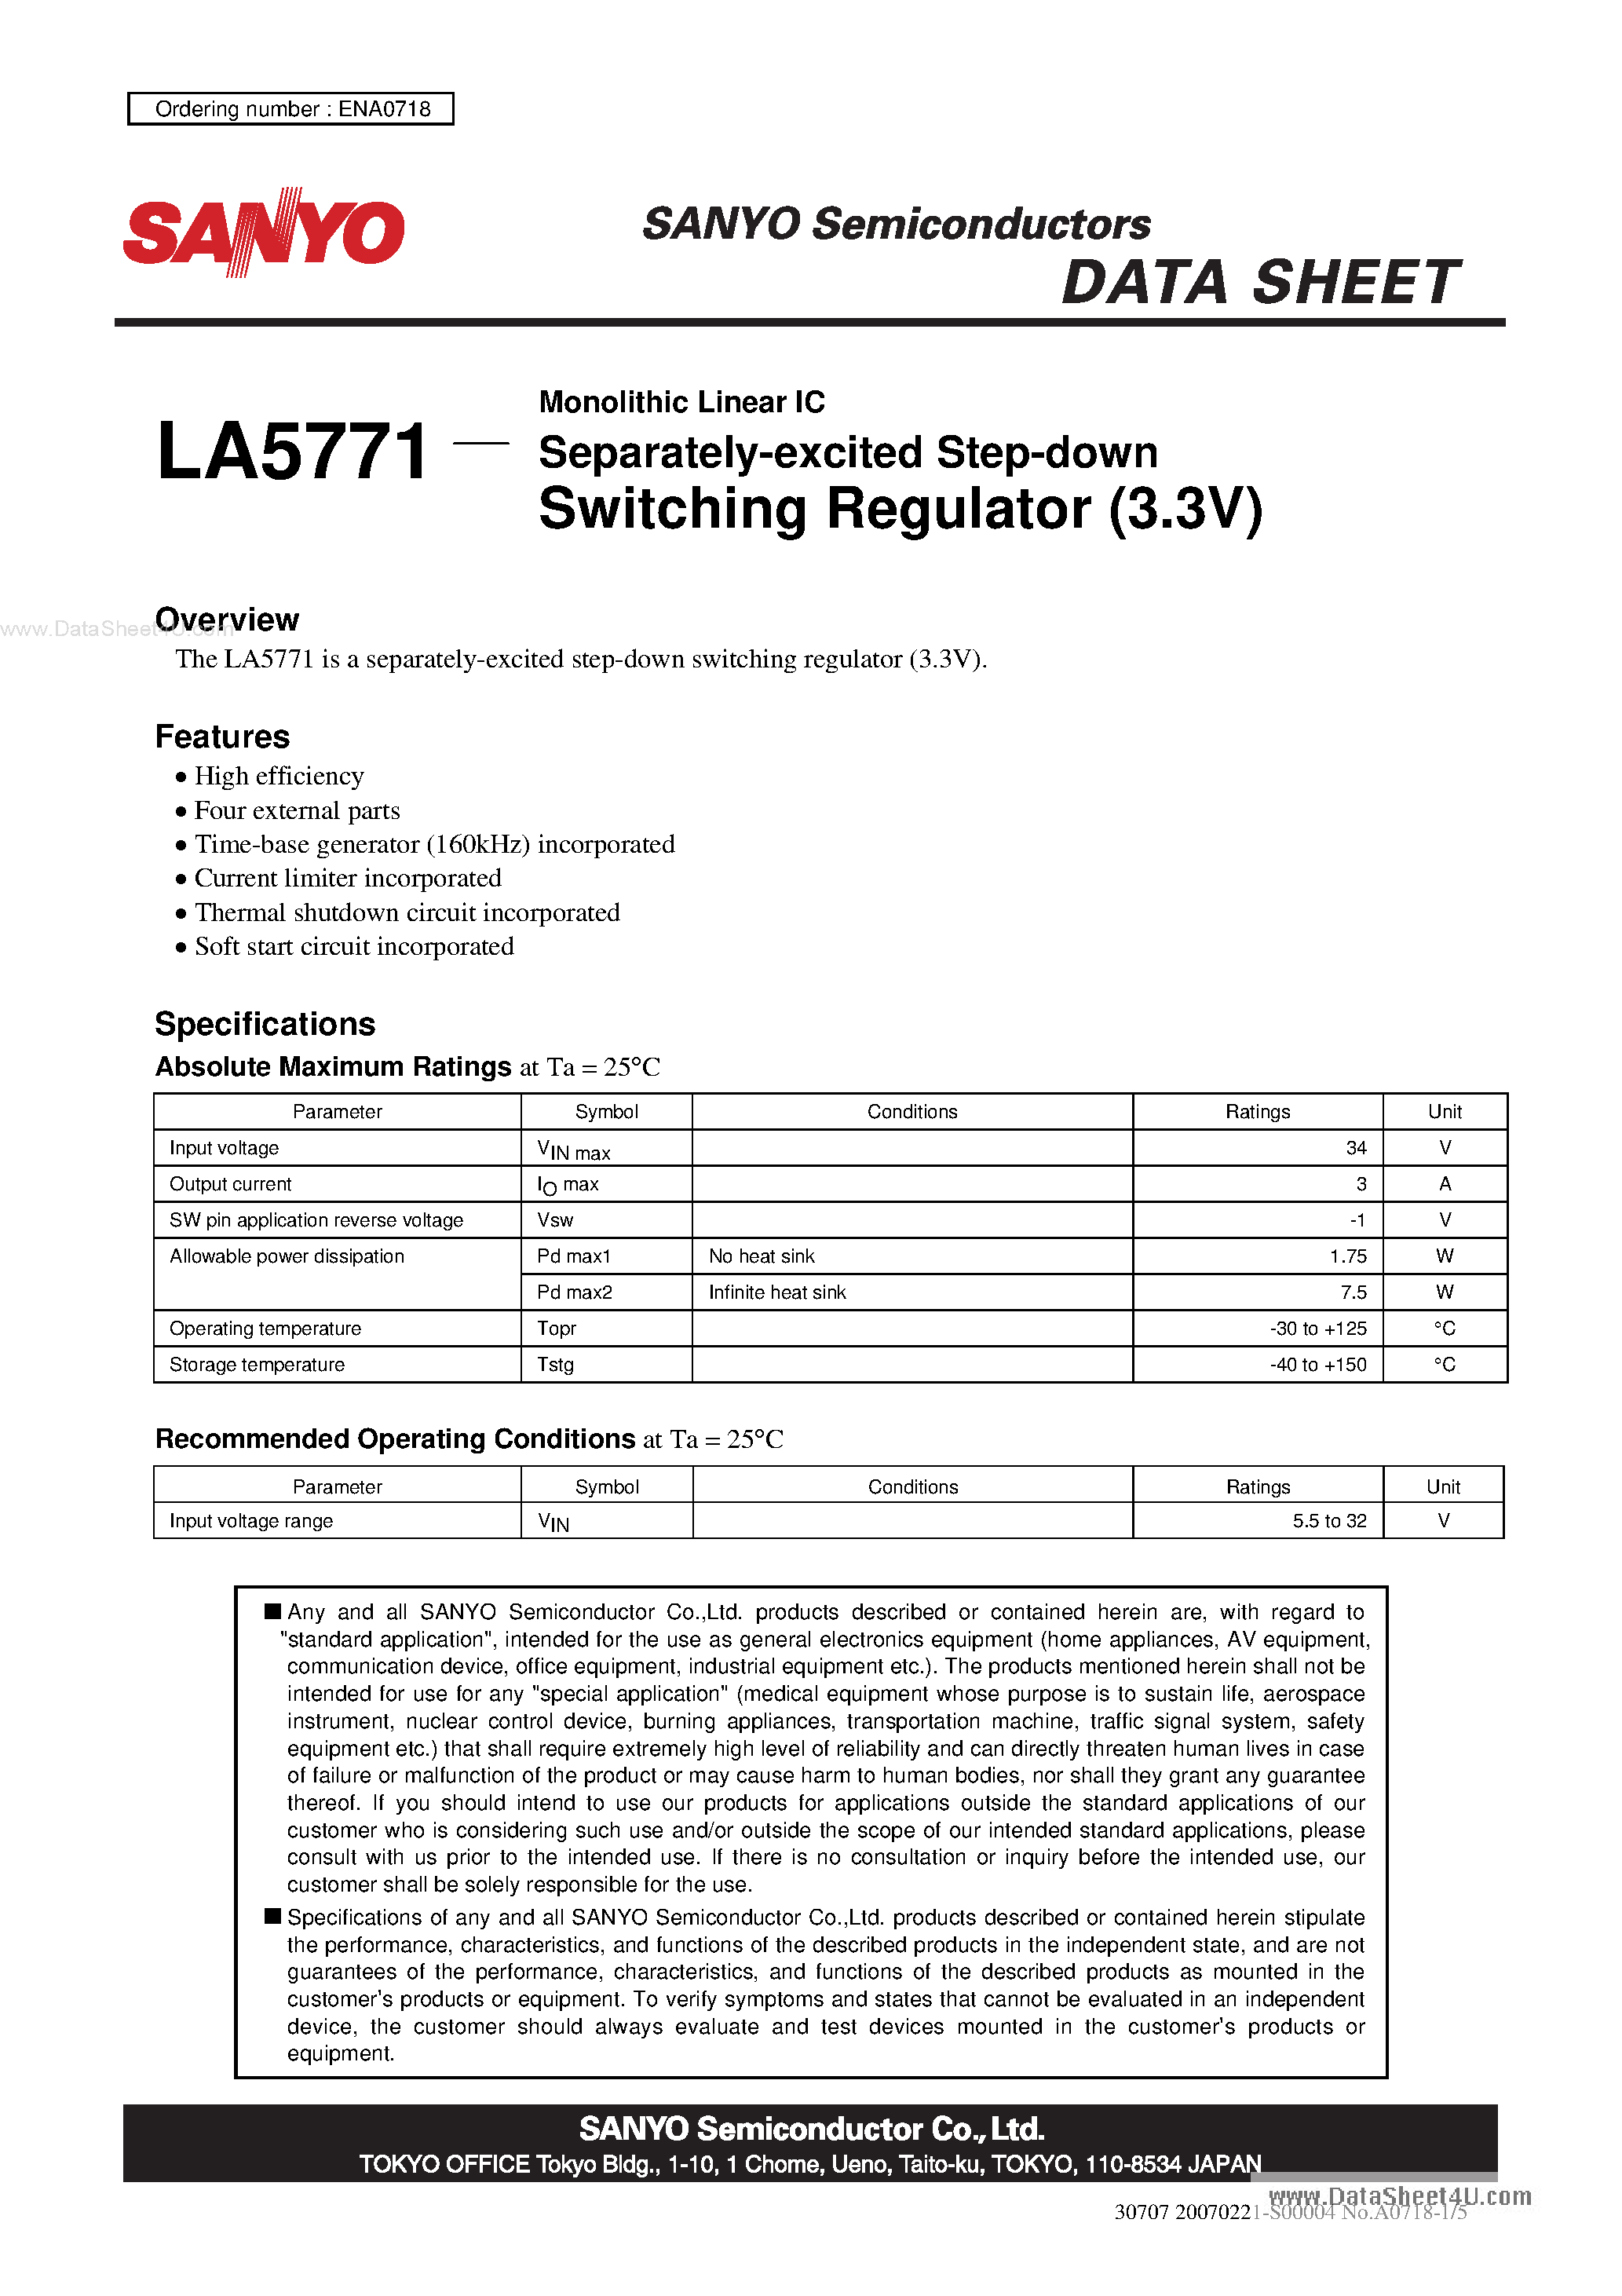 Даташит LA5771-Monolithic Linear IC Separately-Excited Step-Down Switching Regulator страница 1